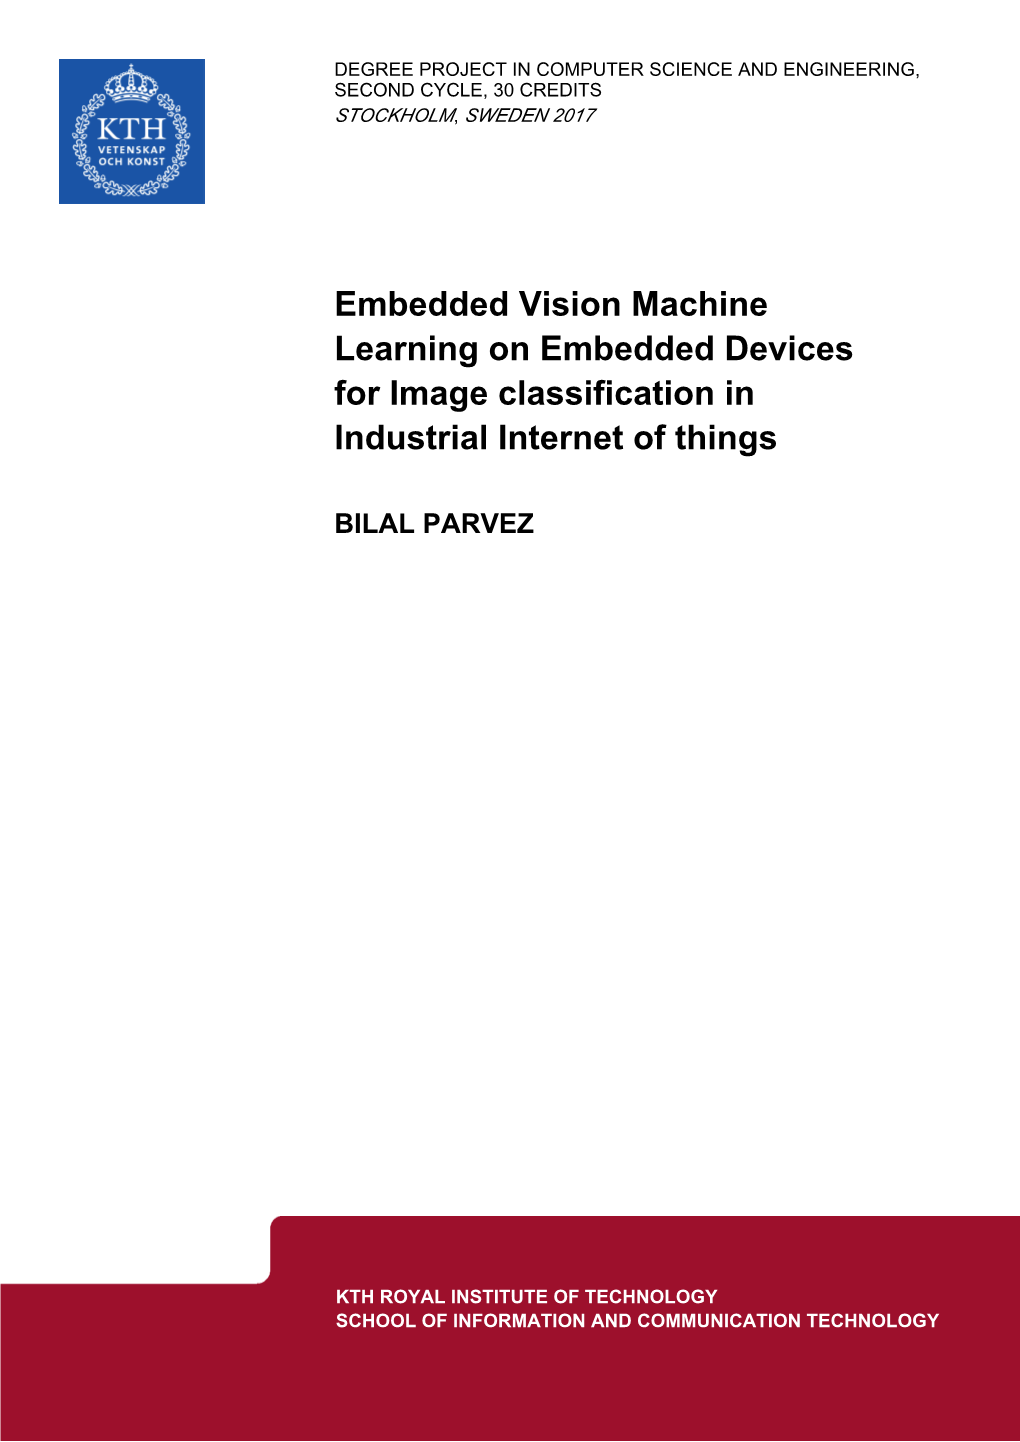 Embedded Vision Machine Learning on Embedded Devices for Image Classification in Industrial Internet of Things